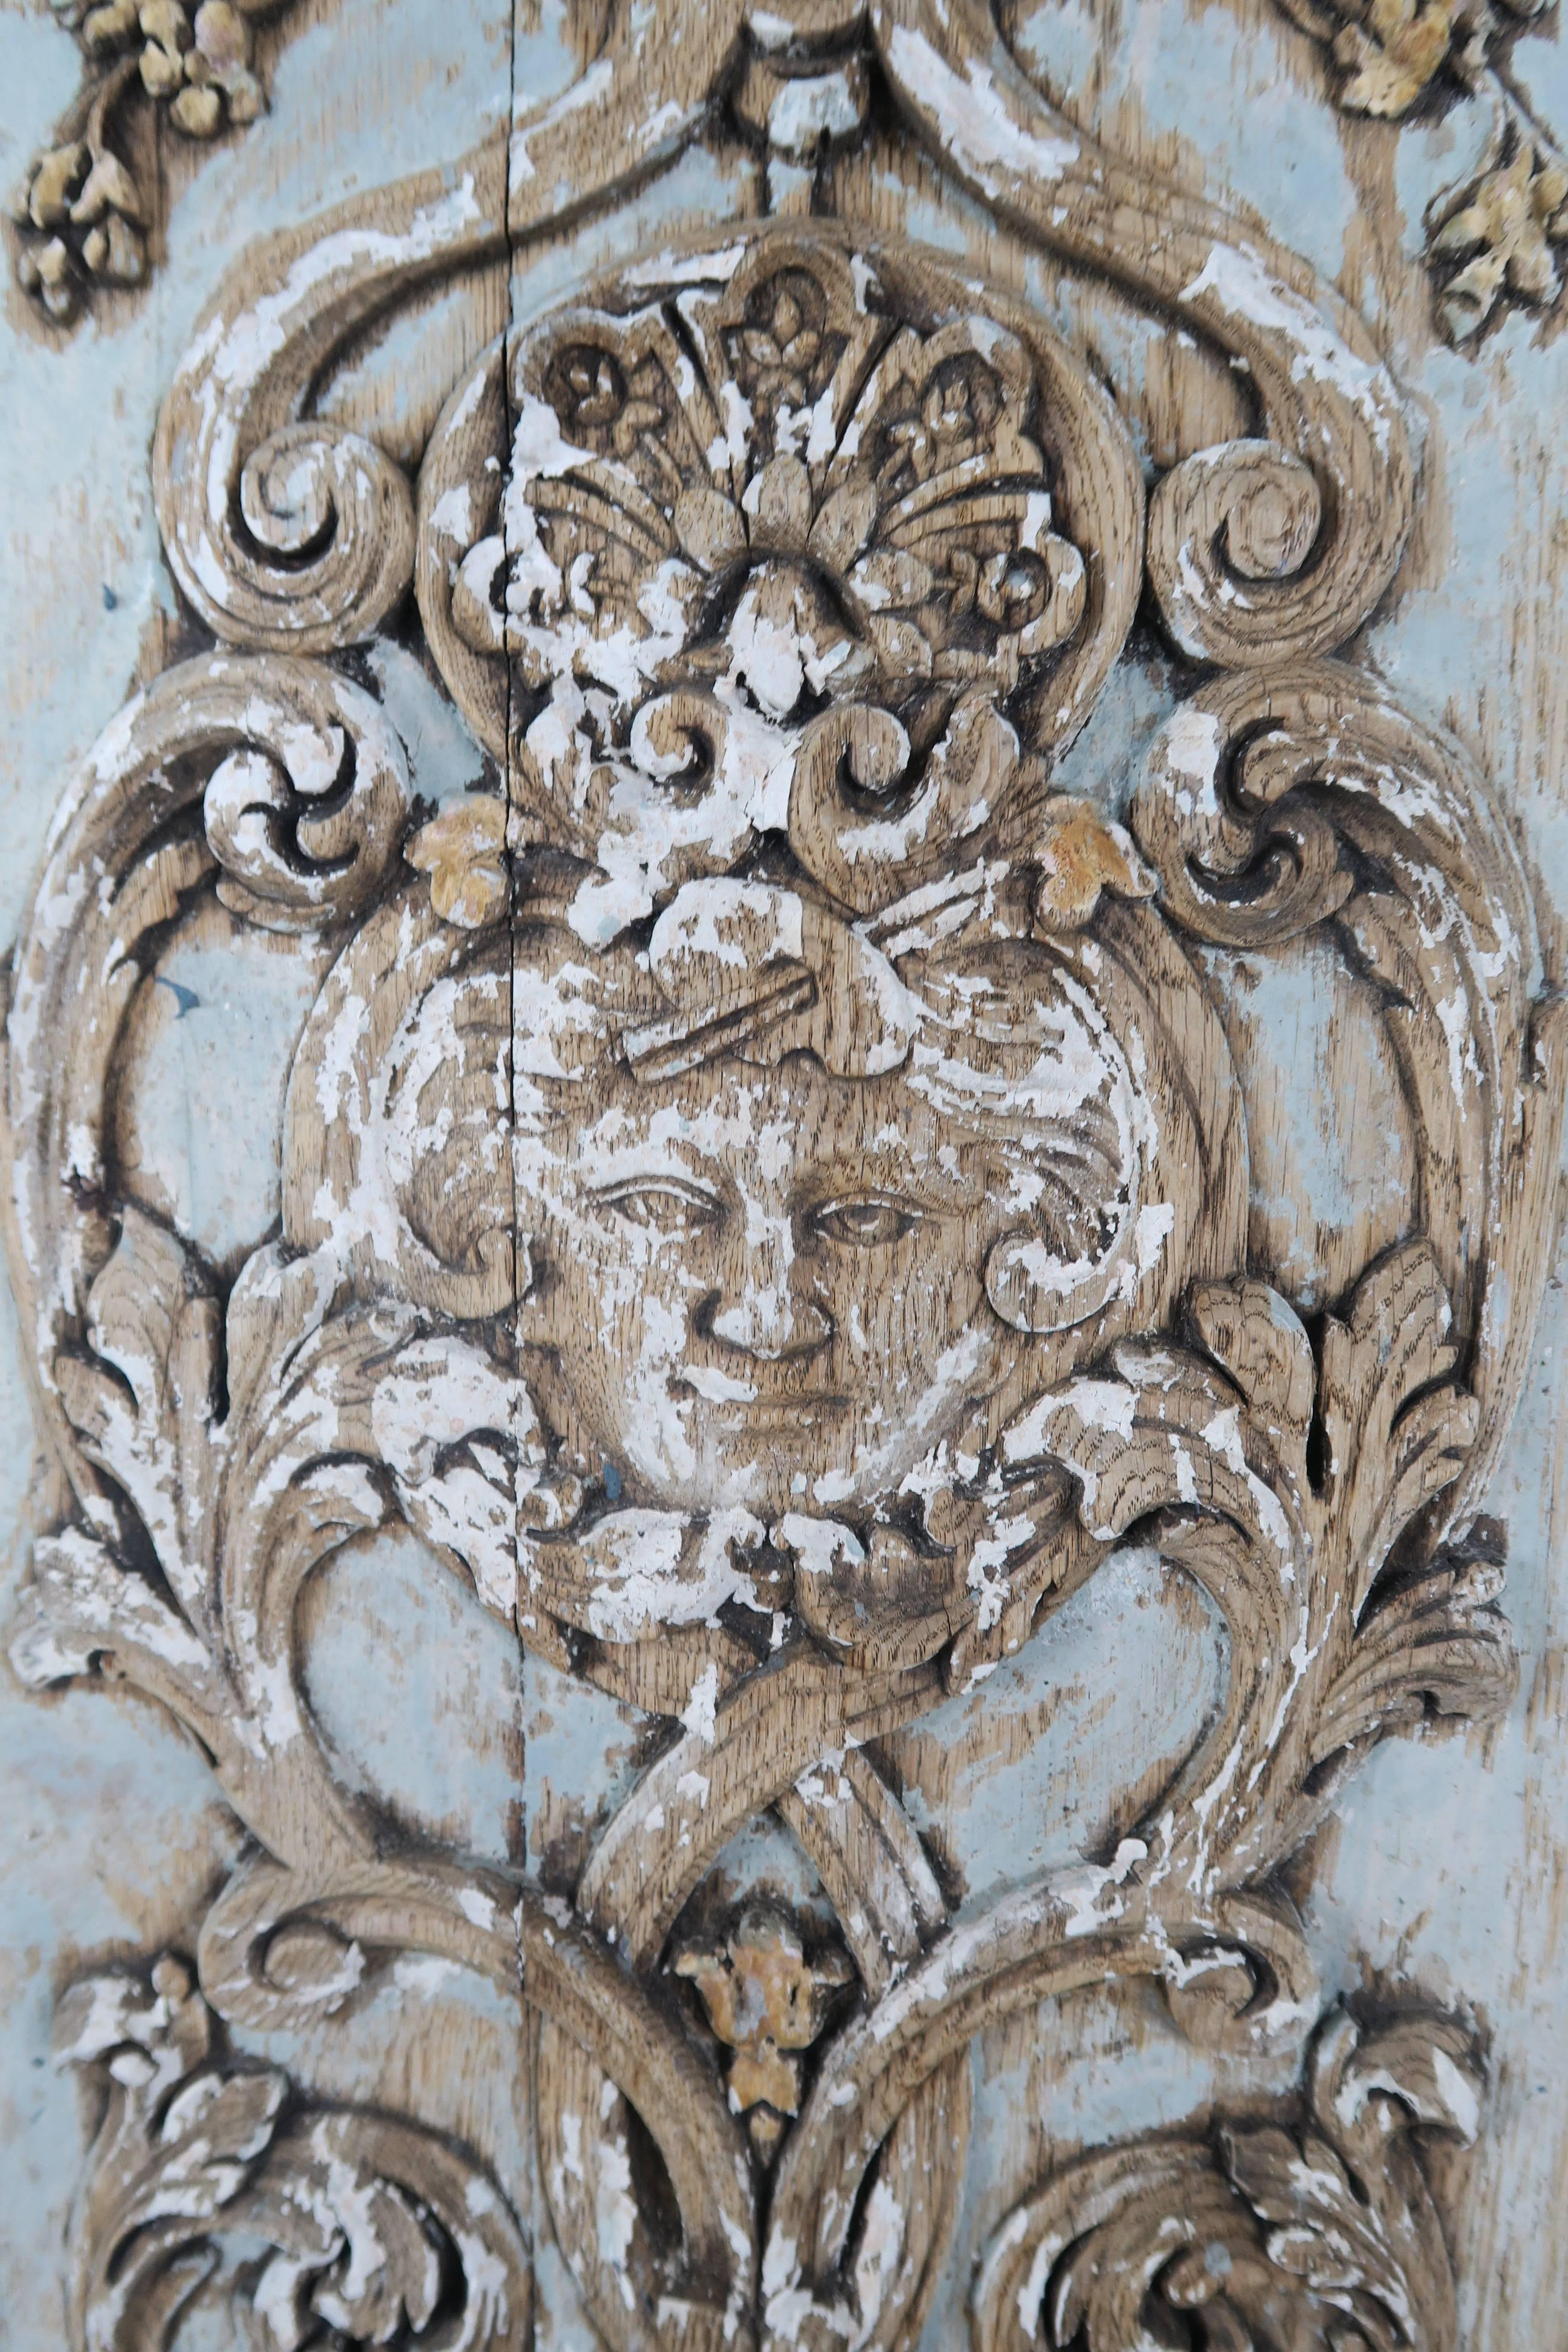 19th century Italian painted carved wood panel depicting a face with swags, flowers and swirling acanthus leaves throughout. Beautiful distressed painted finish.